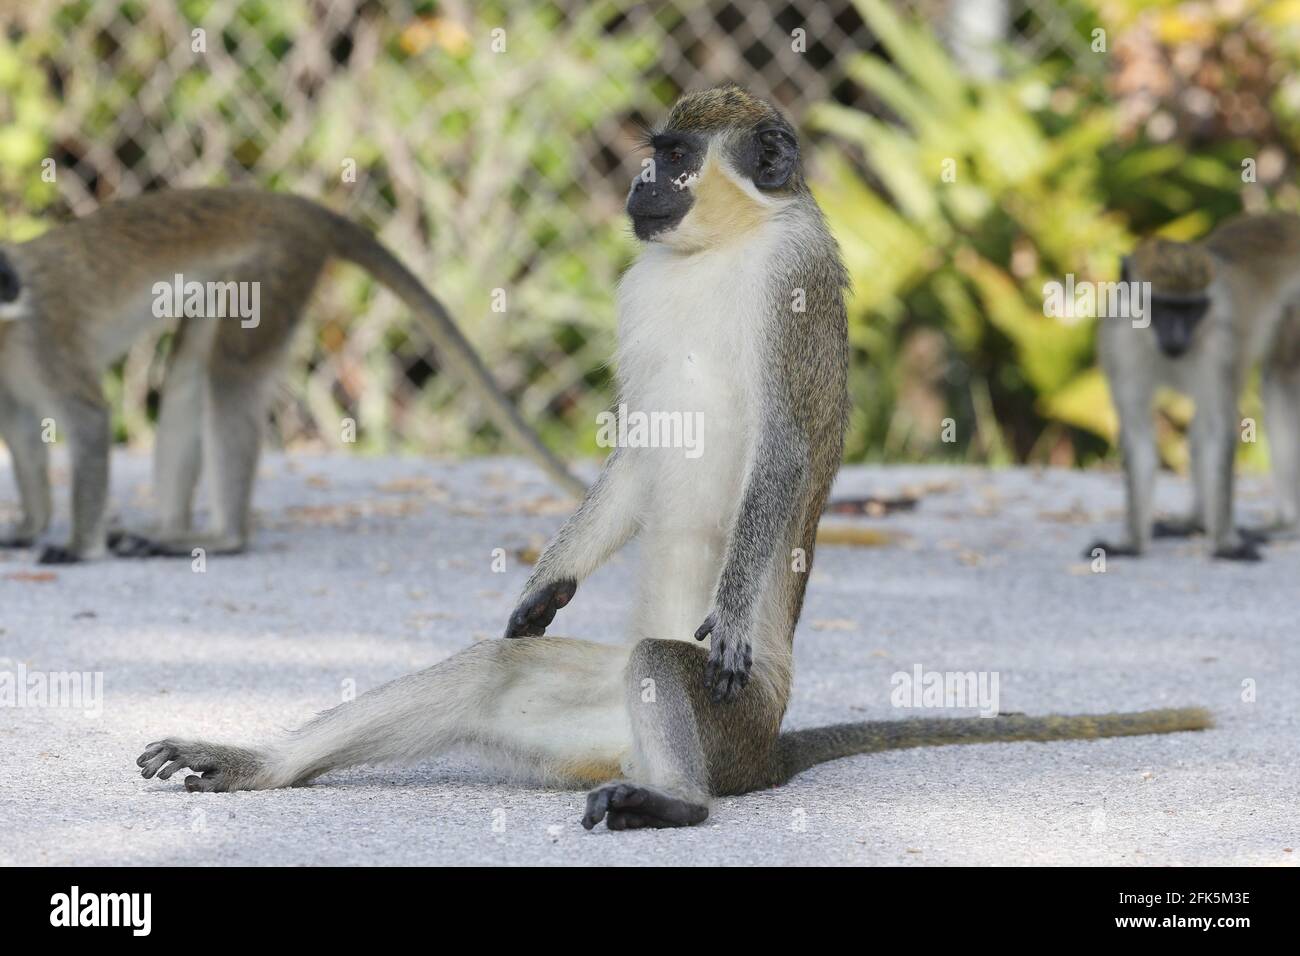 FORT LAUDERDALE, FL - APRIL 28: (No sales New York Post) A large group of  Wild Vervet Monkeys (nonnative to Florida but the most common monkey found  in Sub-Saharan Africa) were spotted